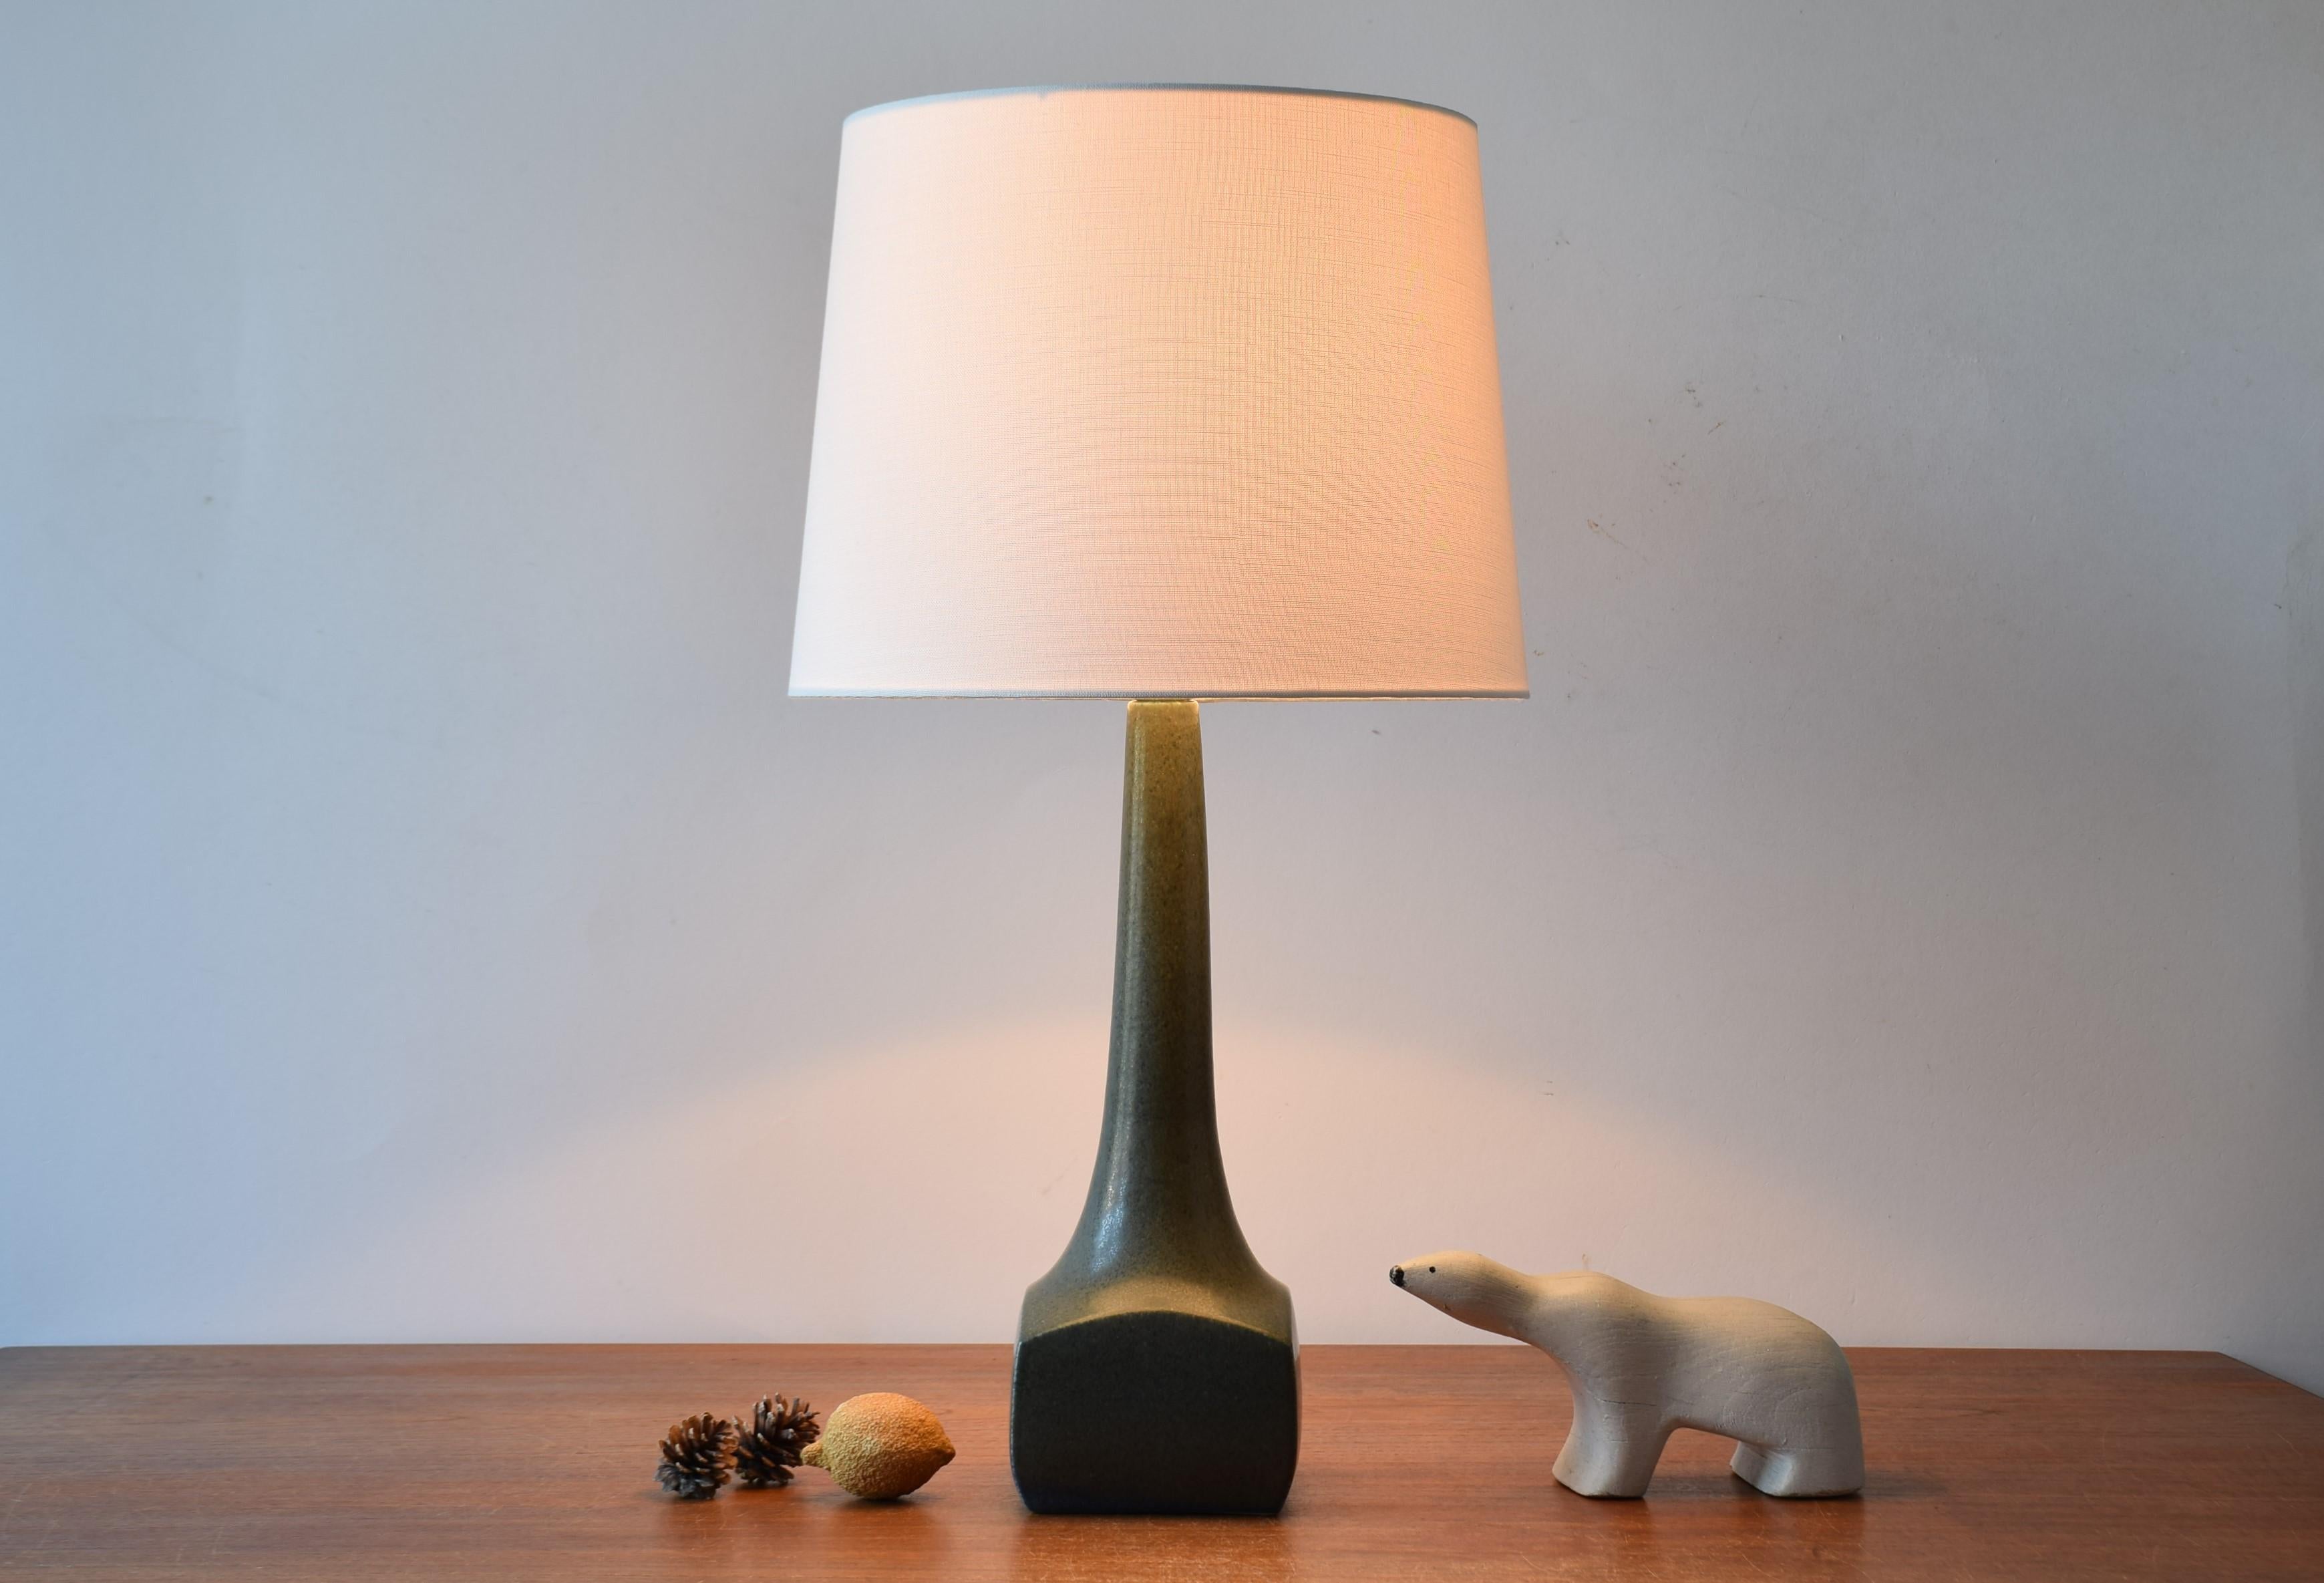 Midcentury Danish table lamp from the ceramic workshop of Michael Andersen & Søn (Michael Andersen & Son) on the Danish island Bornholm. Designed and made ca 1960s.
The lampbase is made of stoneware has a matte bottle green slightly speckled glaze